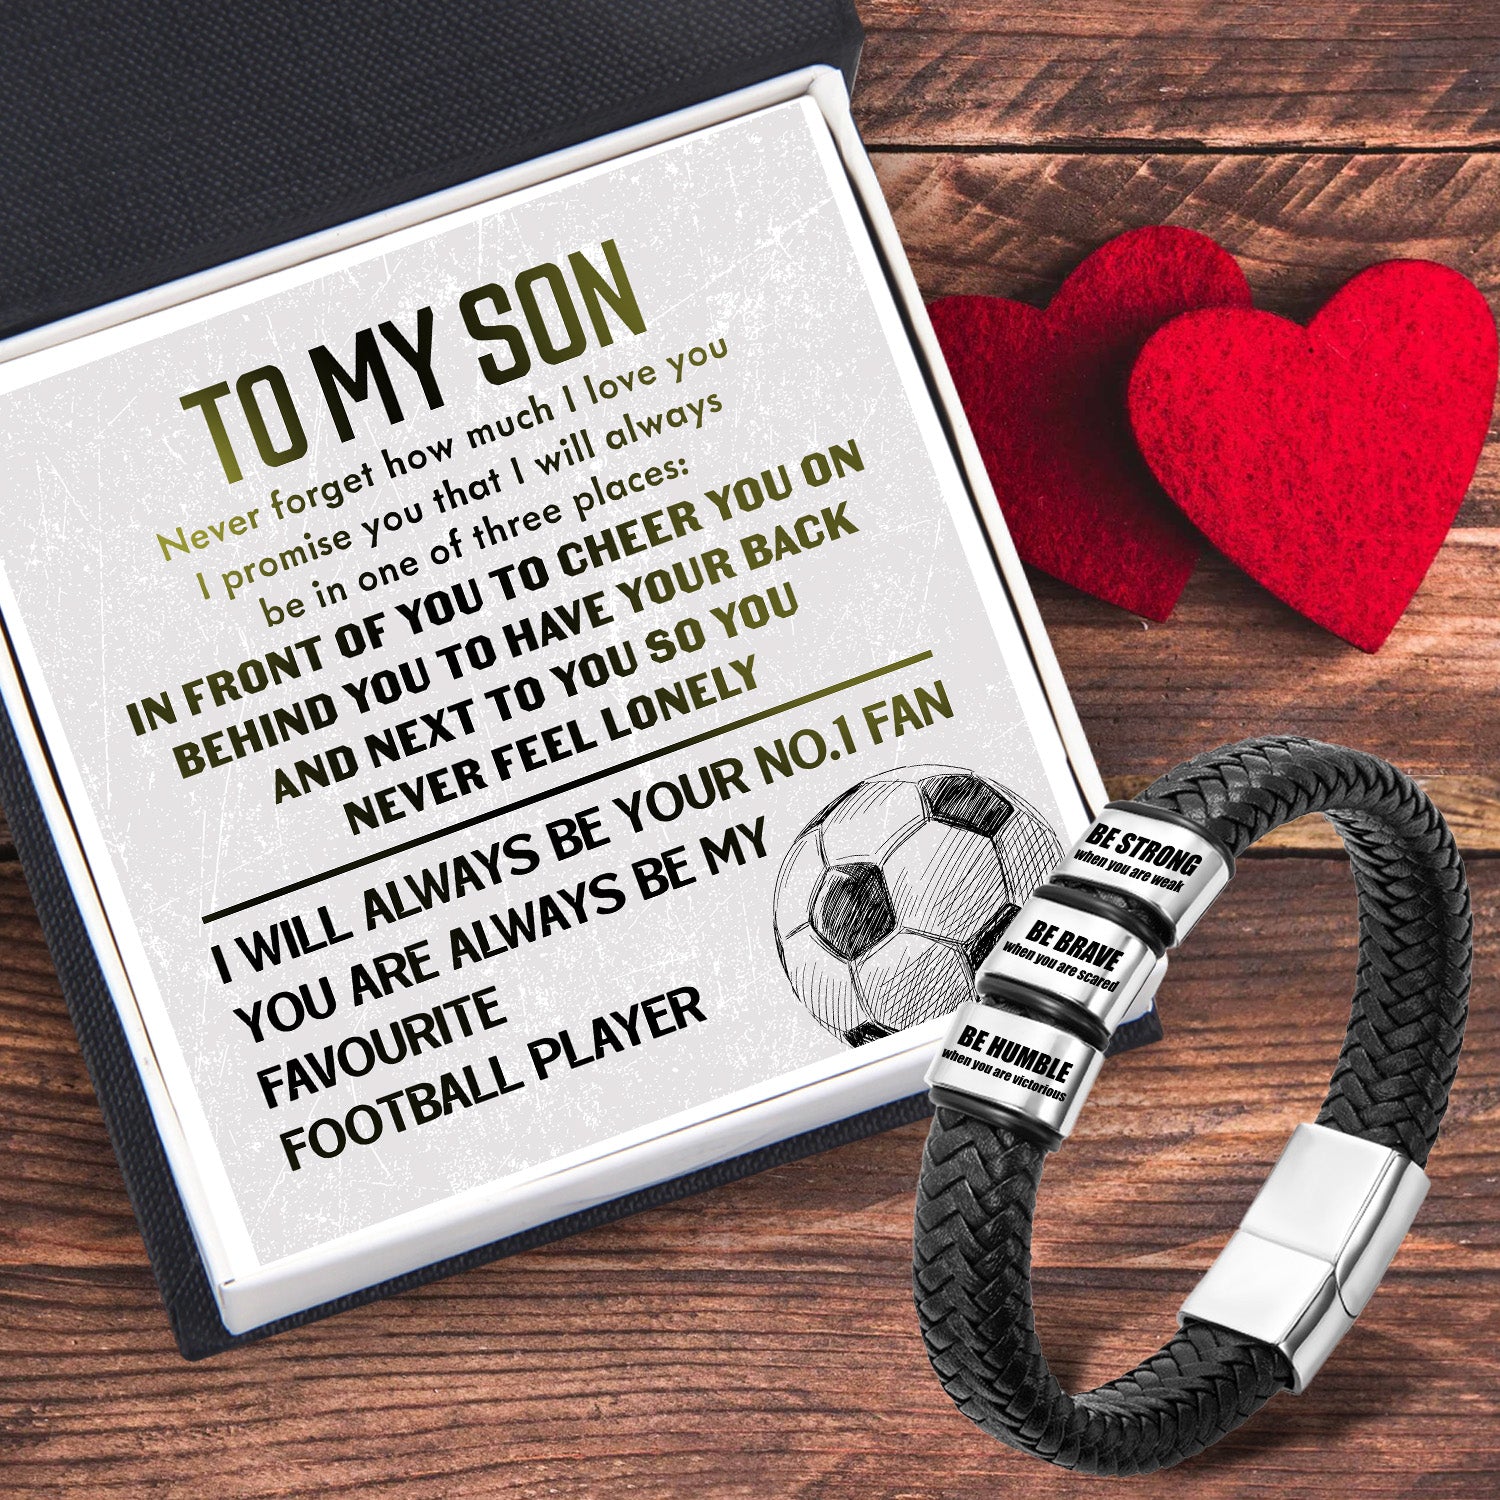 Leather Bracelet - Football - To My Son - Never Forget How Much I Love You - Ukgbzl16026